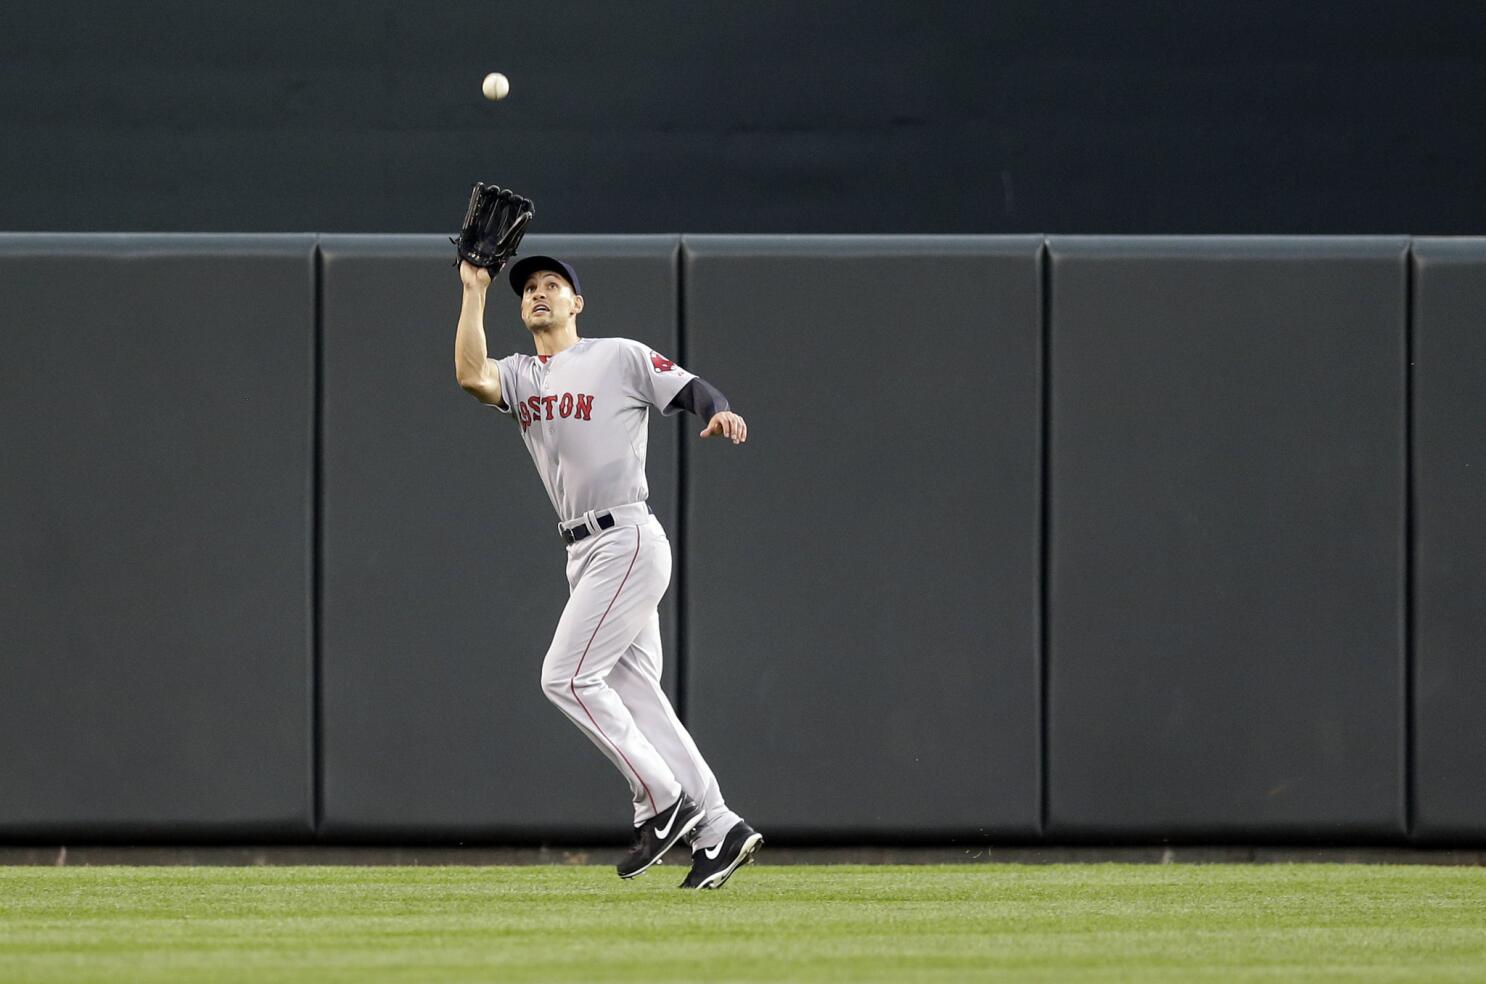 Grady Sizemore named Red Sox' starting center fielder - Over the